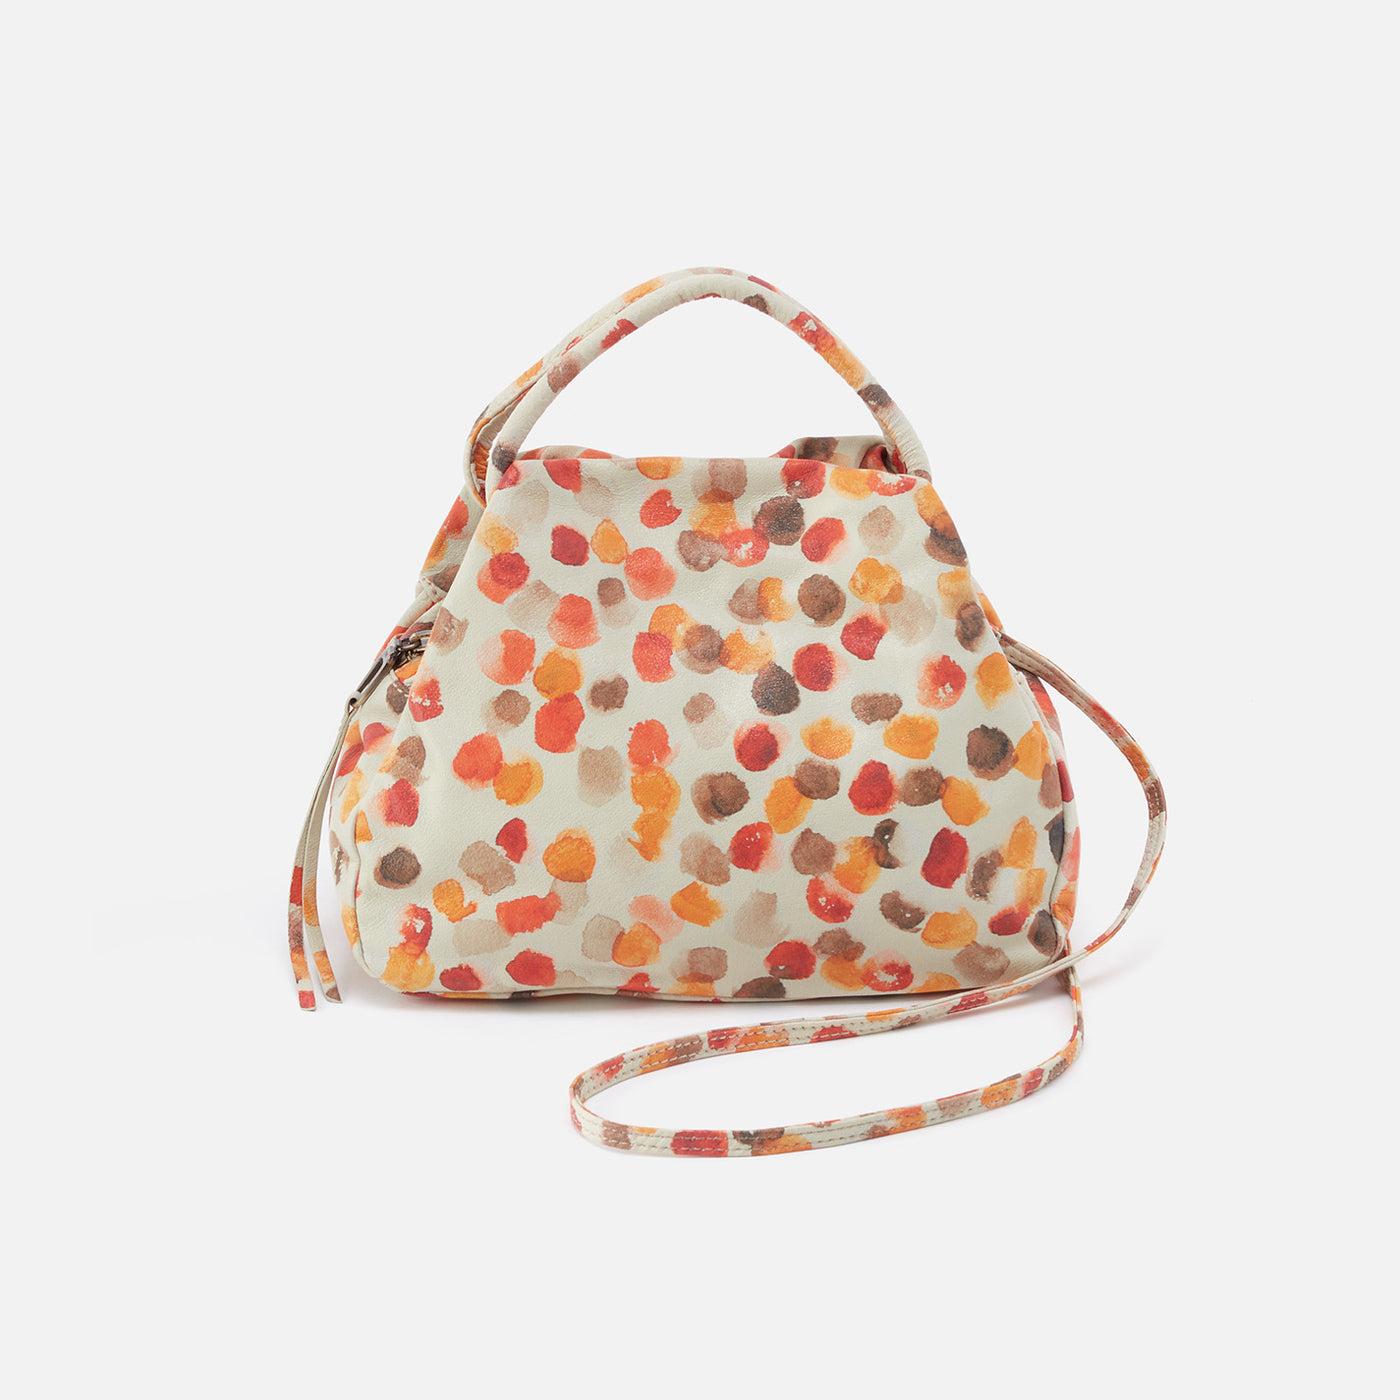 Darling Small Satchel in Printed Leather - Dots Print